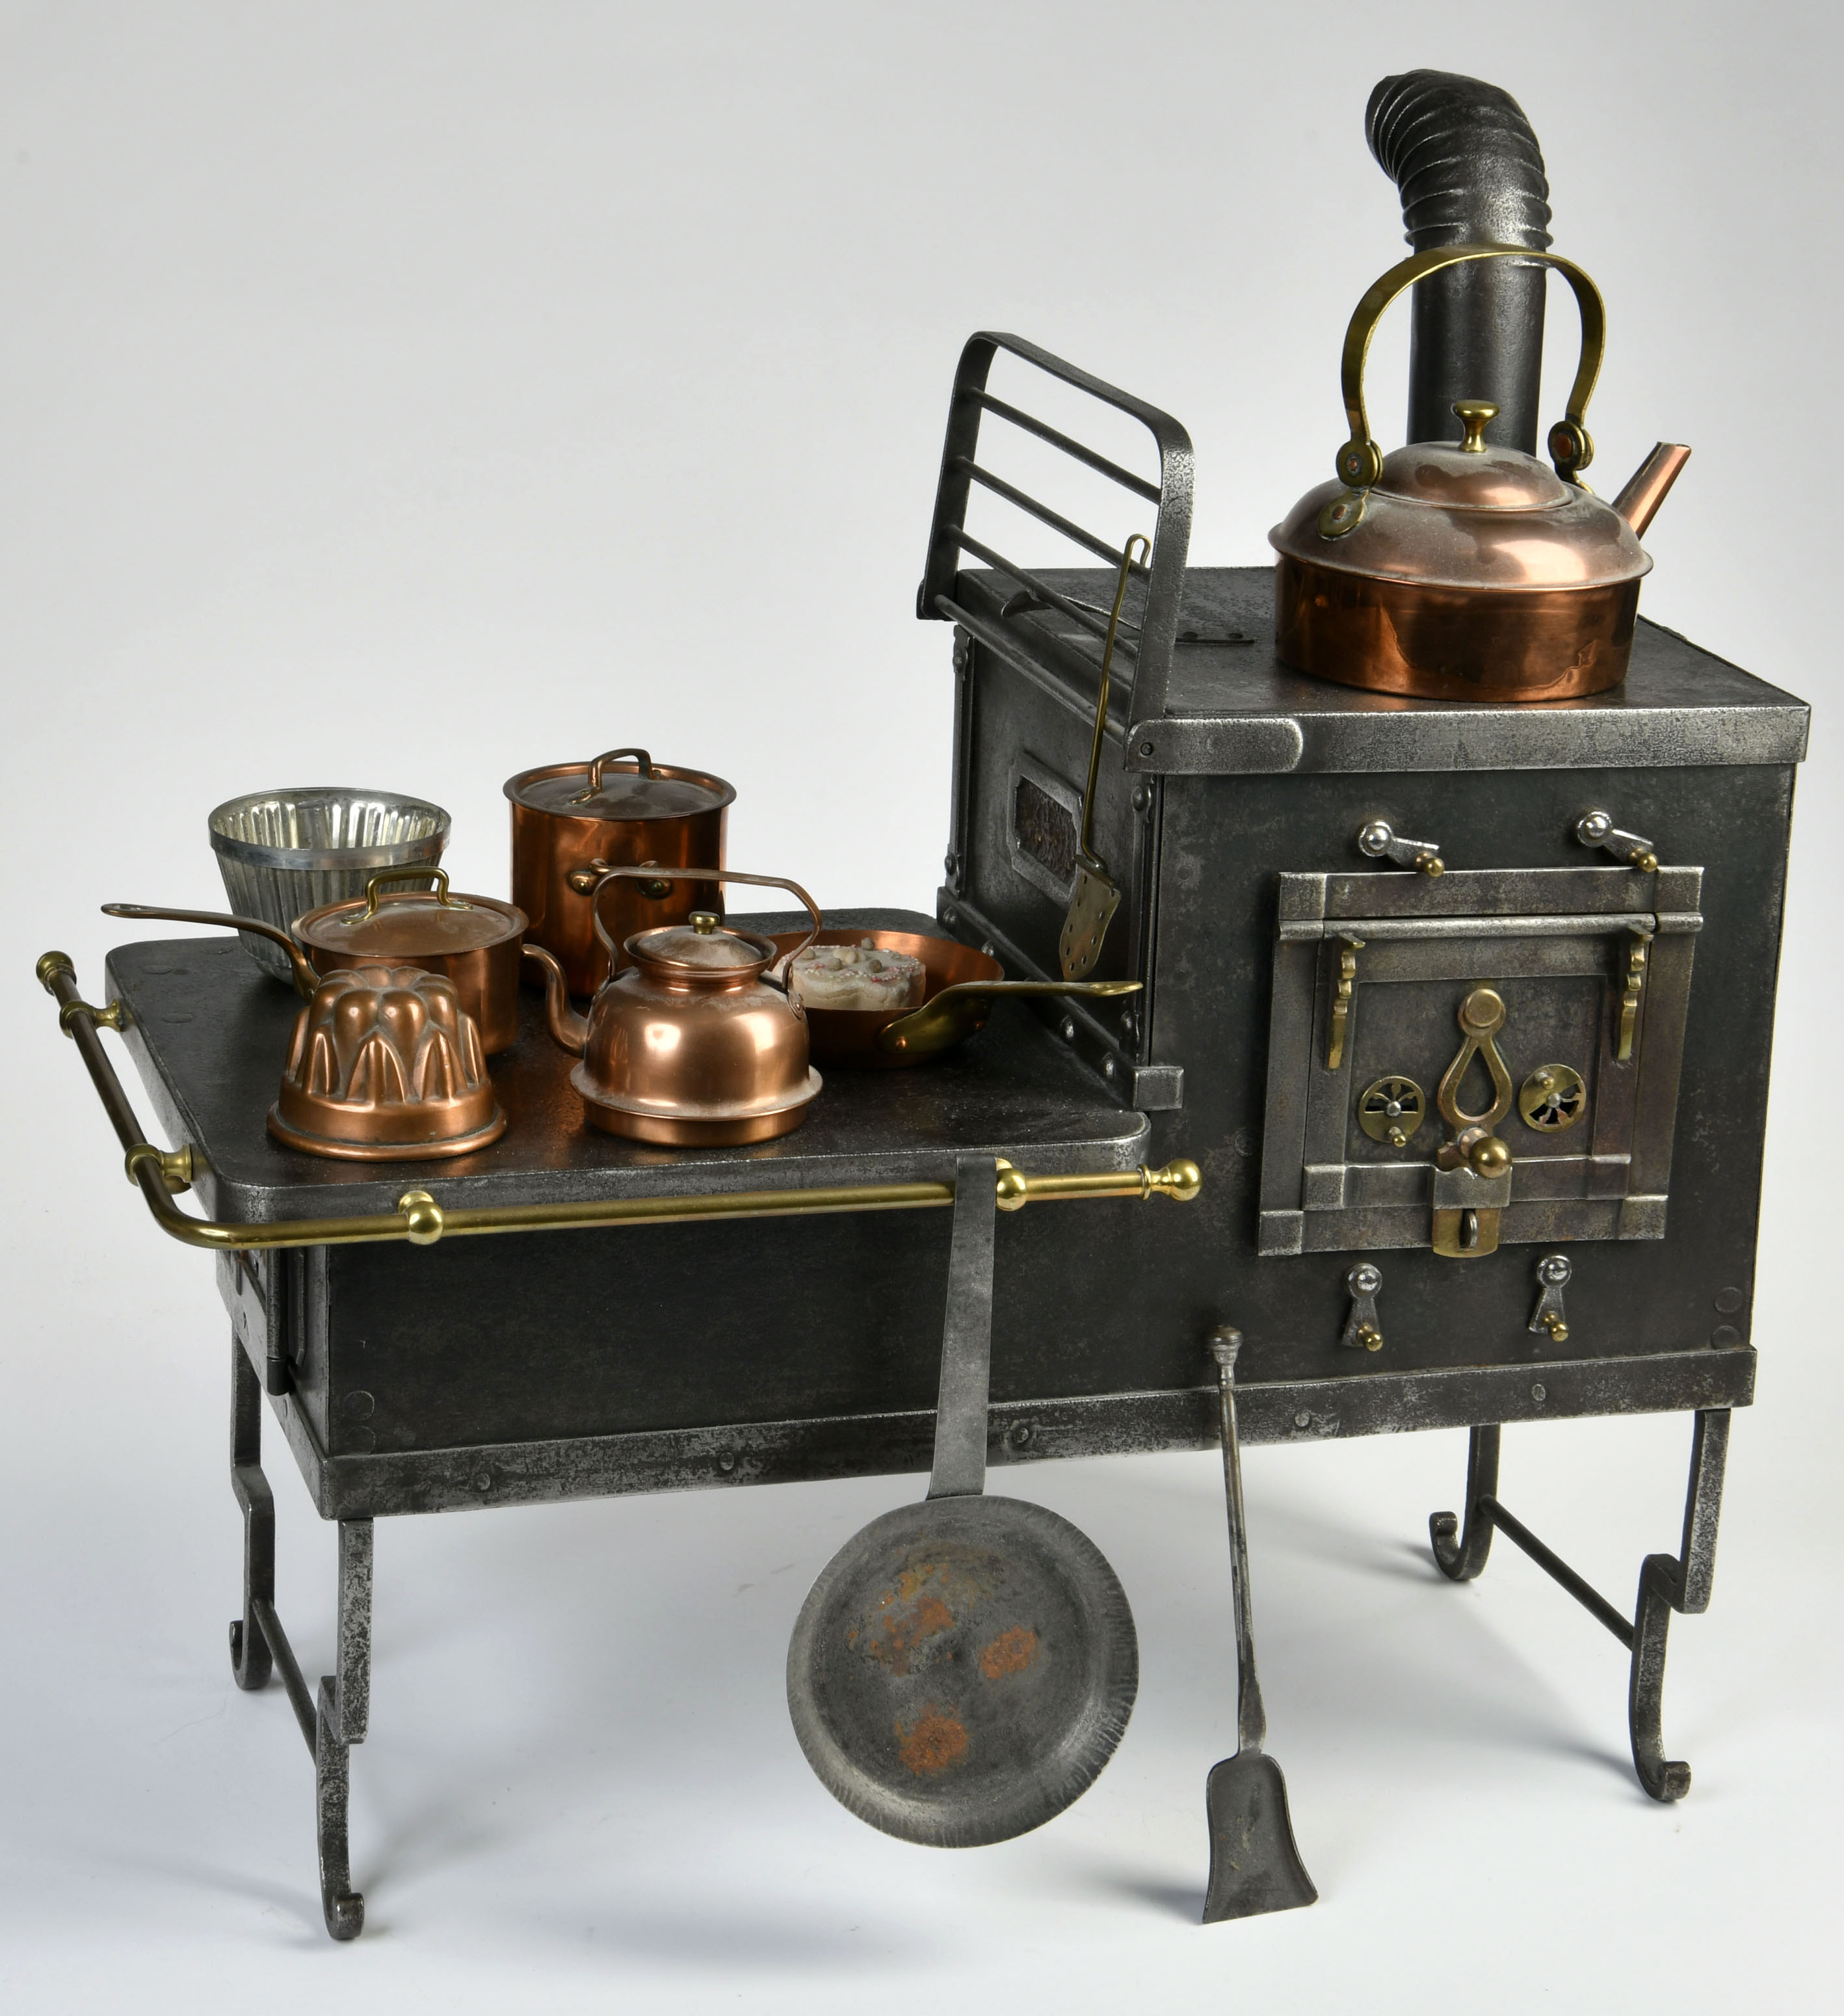 Step iron cooker, single-unit production, probably Austria, 19th century, two holes, iron chimney - Image 2 of 2